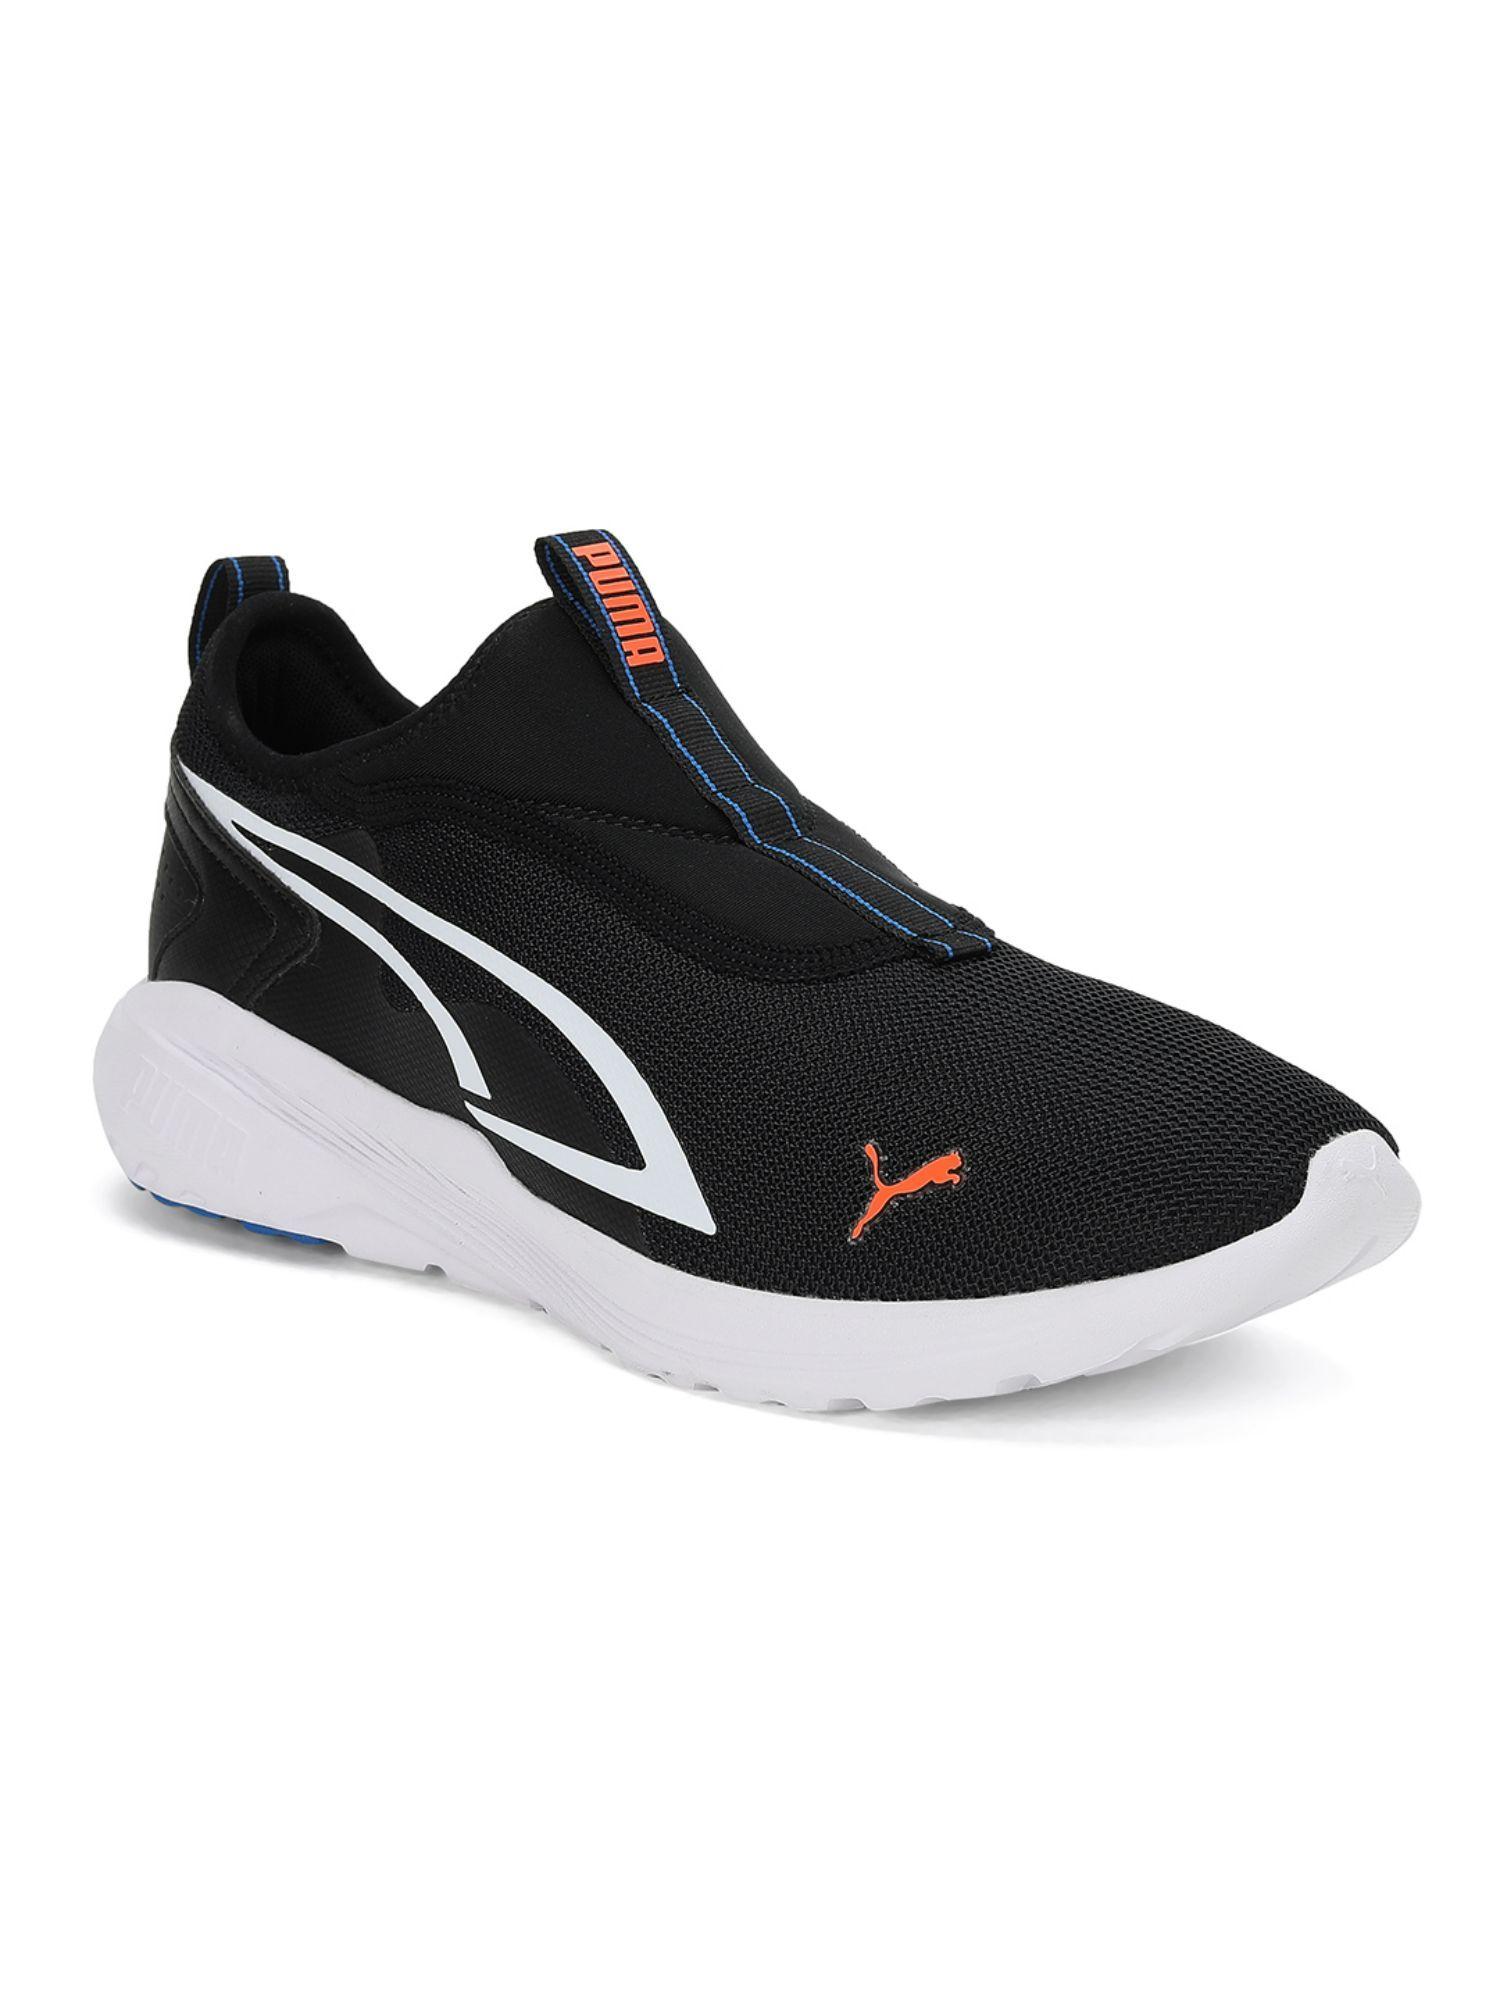 All-Day Active SlipOn Unisex Black Casual Shoes